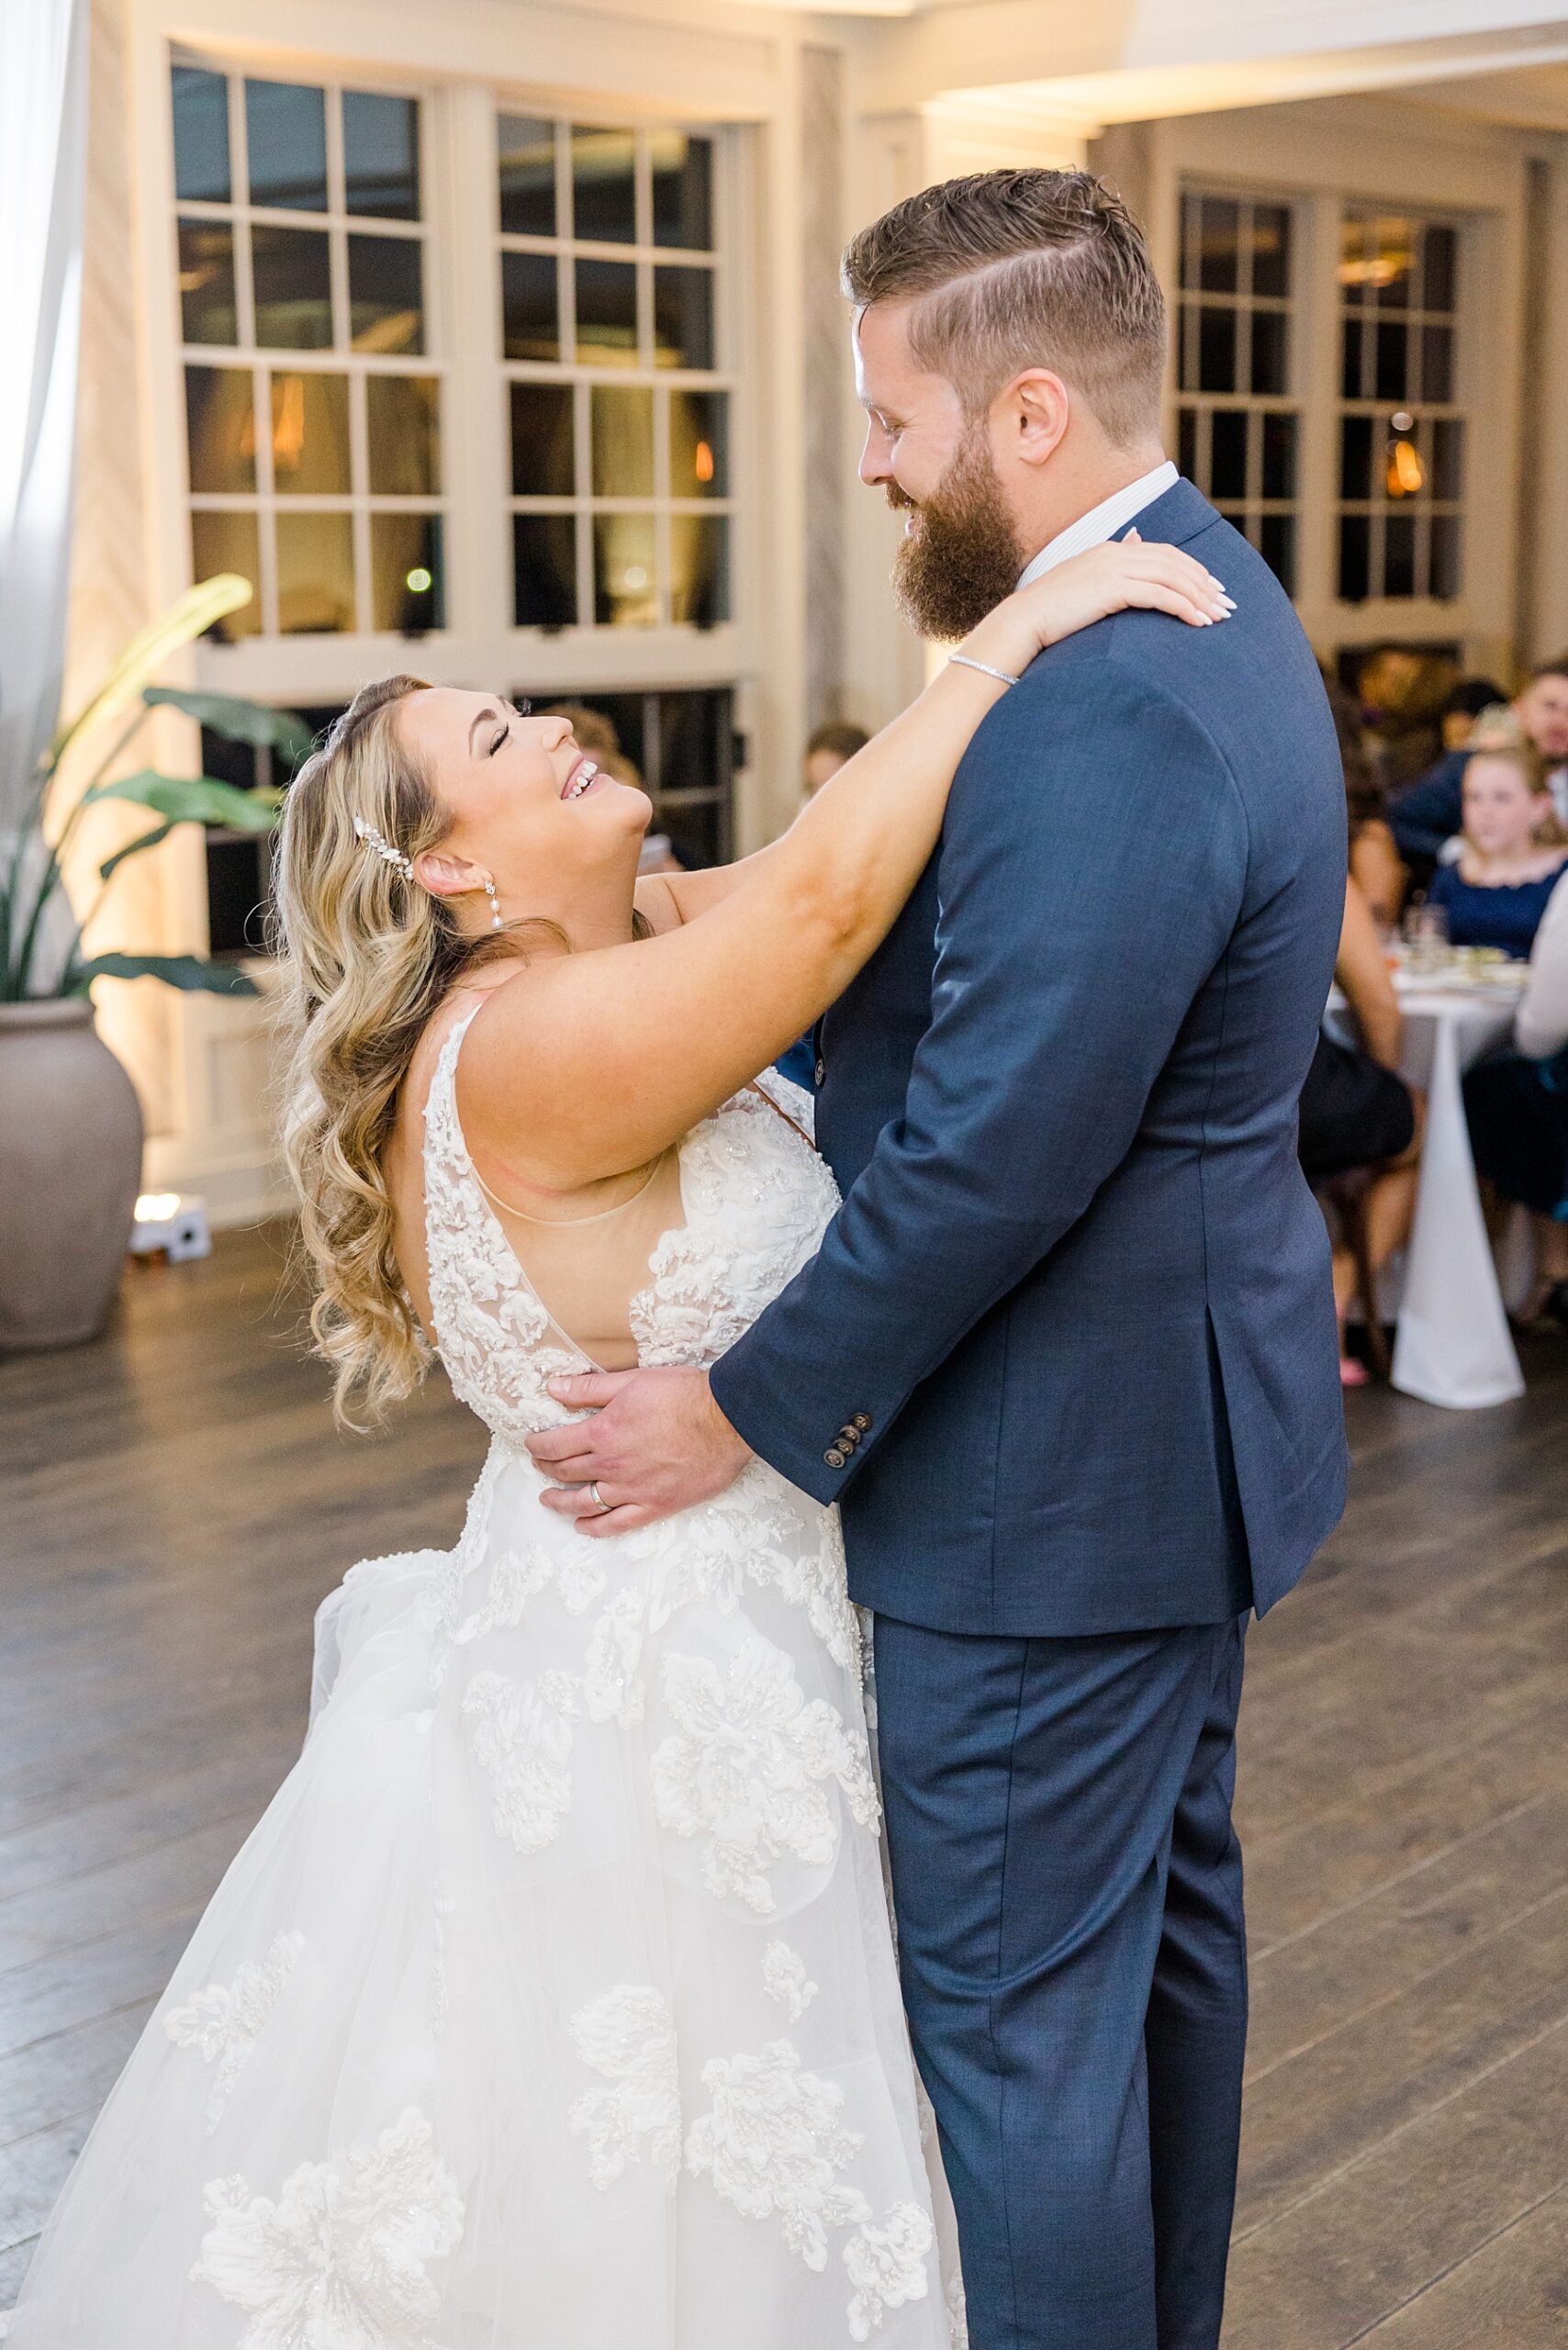 candid wedding portrait of couple dancing together 